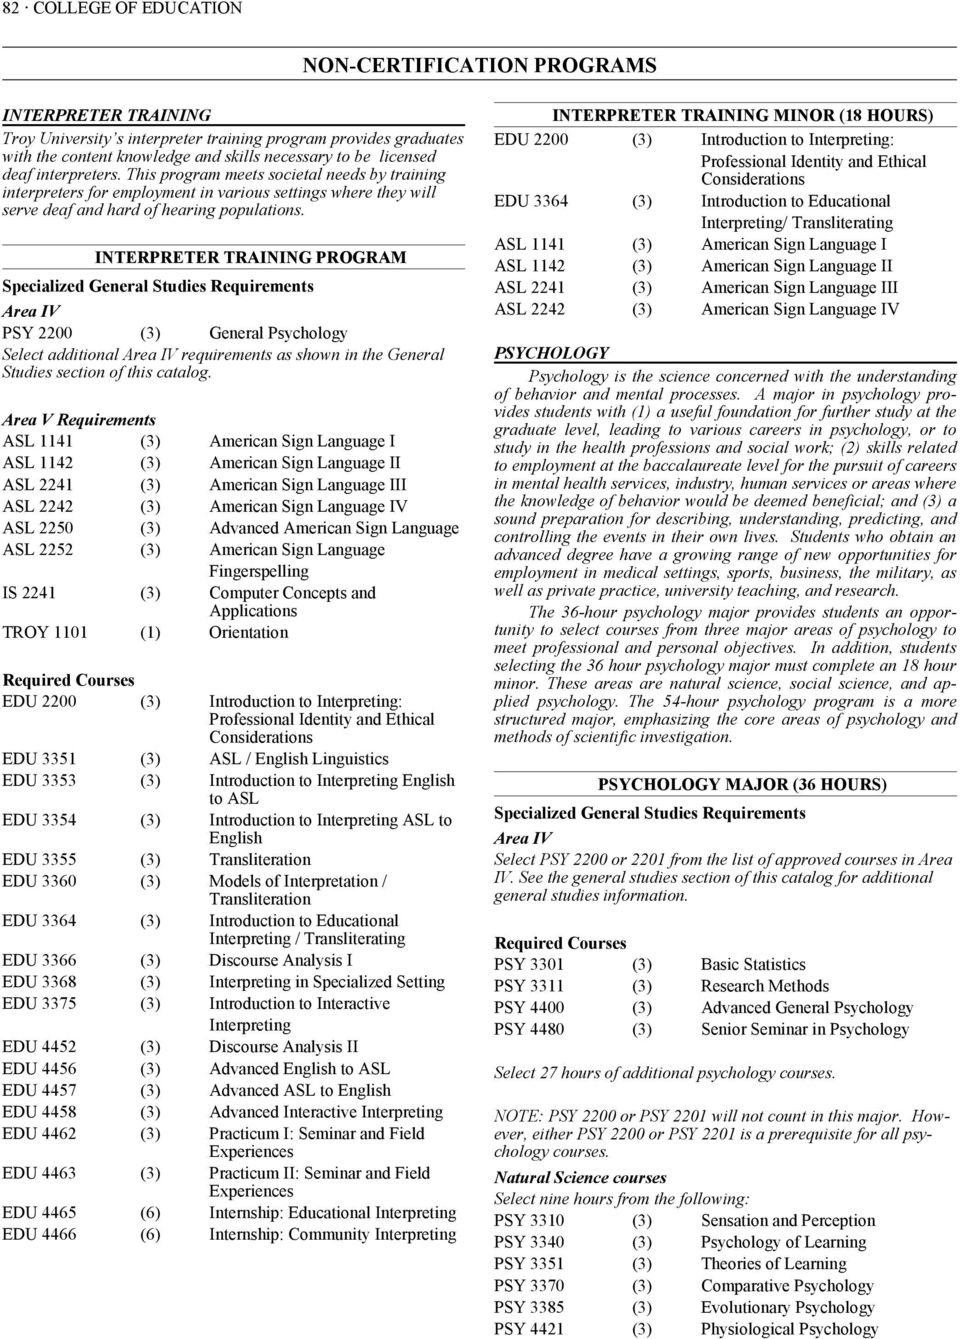 INTERPRETER TRAINING PROGRAM PSY 2200 (3) General Psychology Select additional requirements as shown in the General Studies section of this catalog.